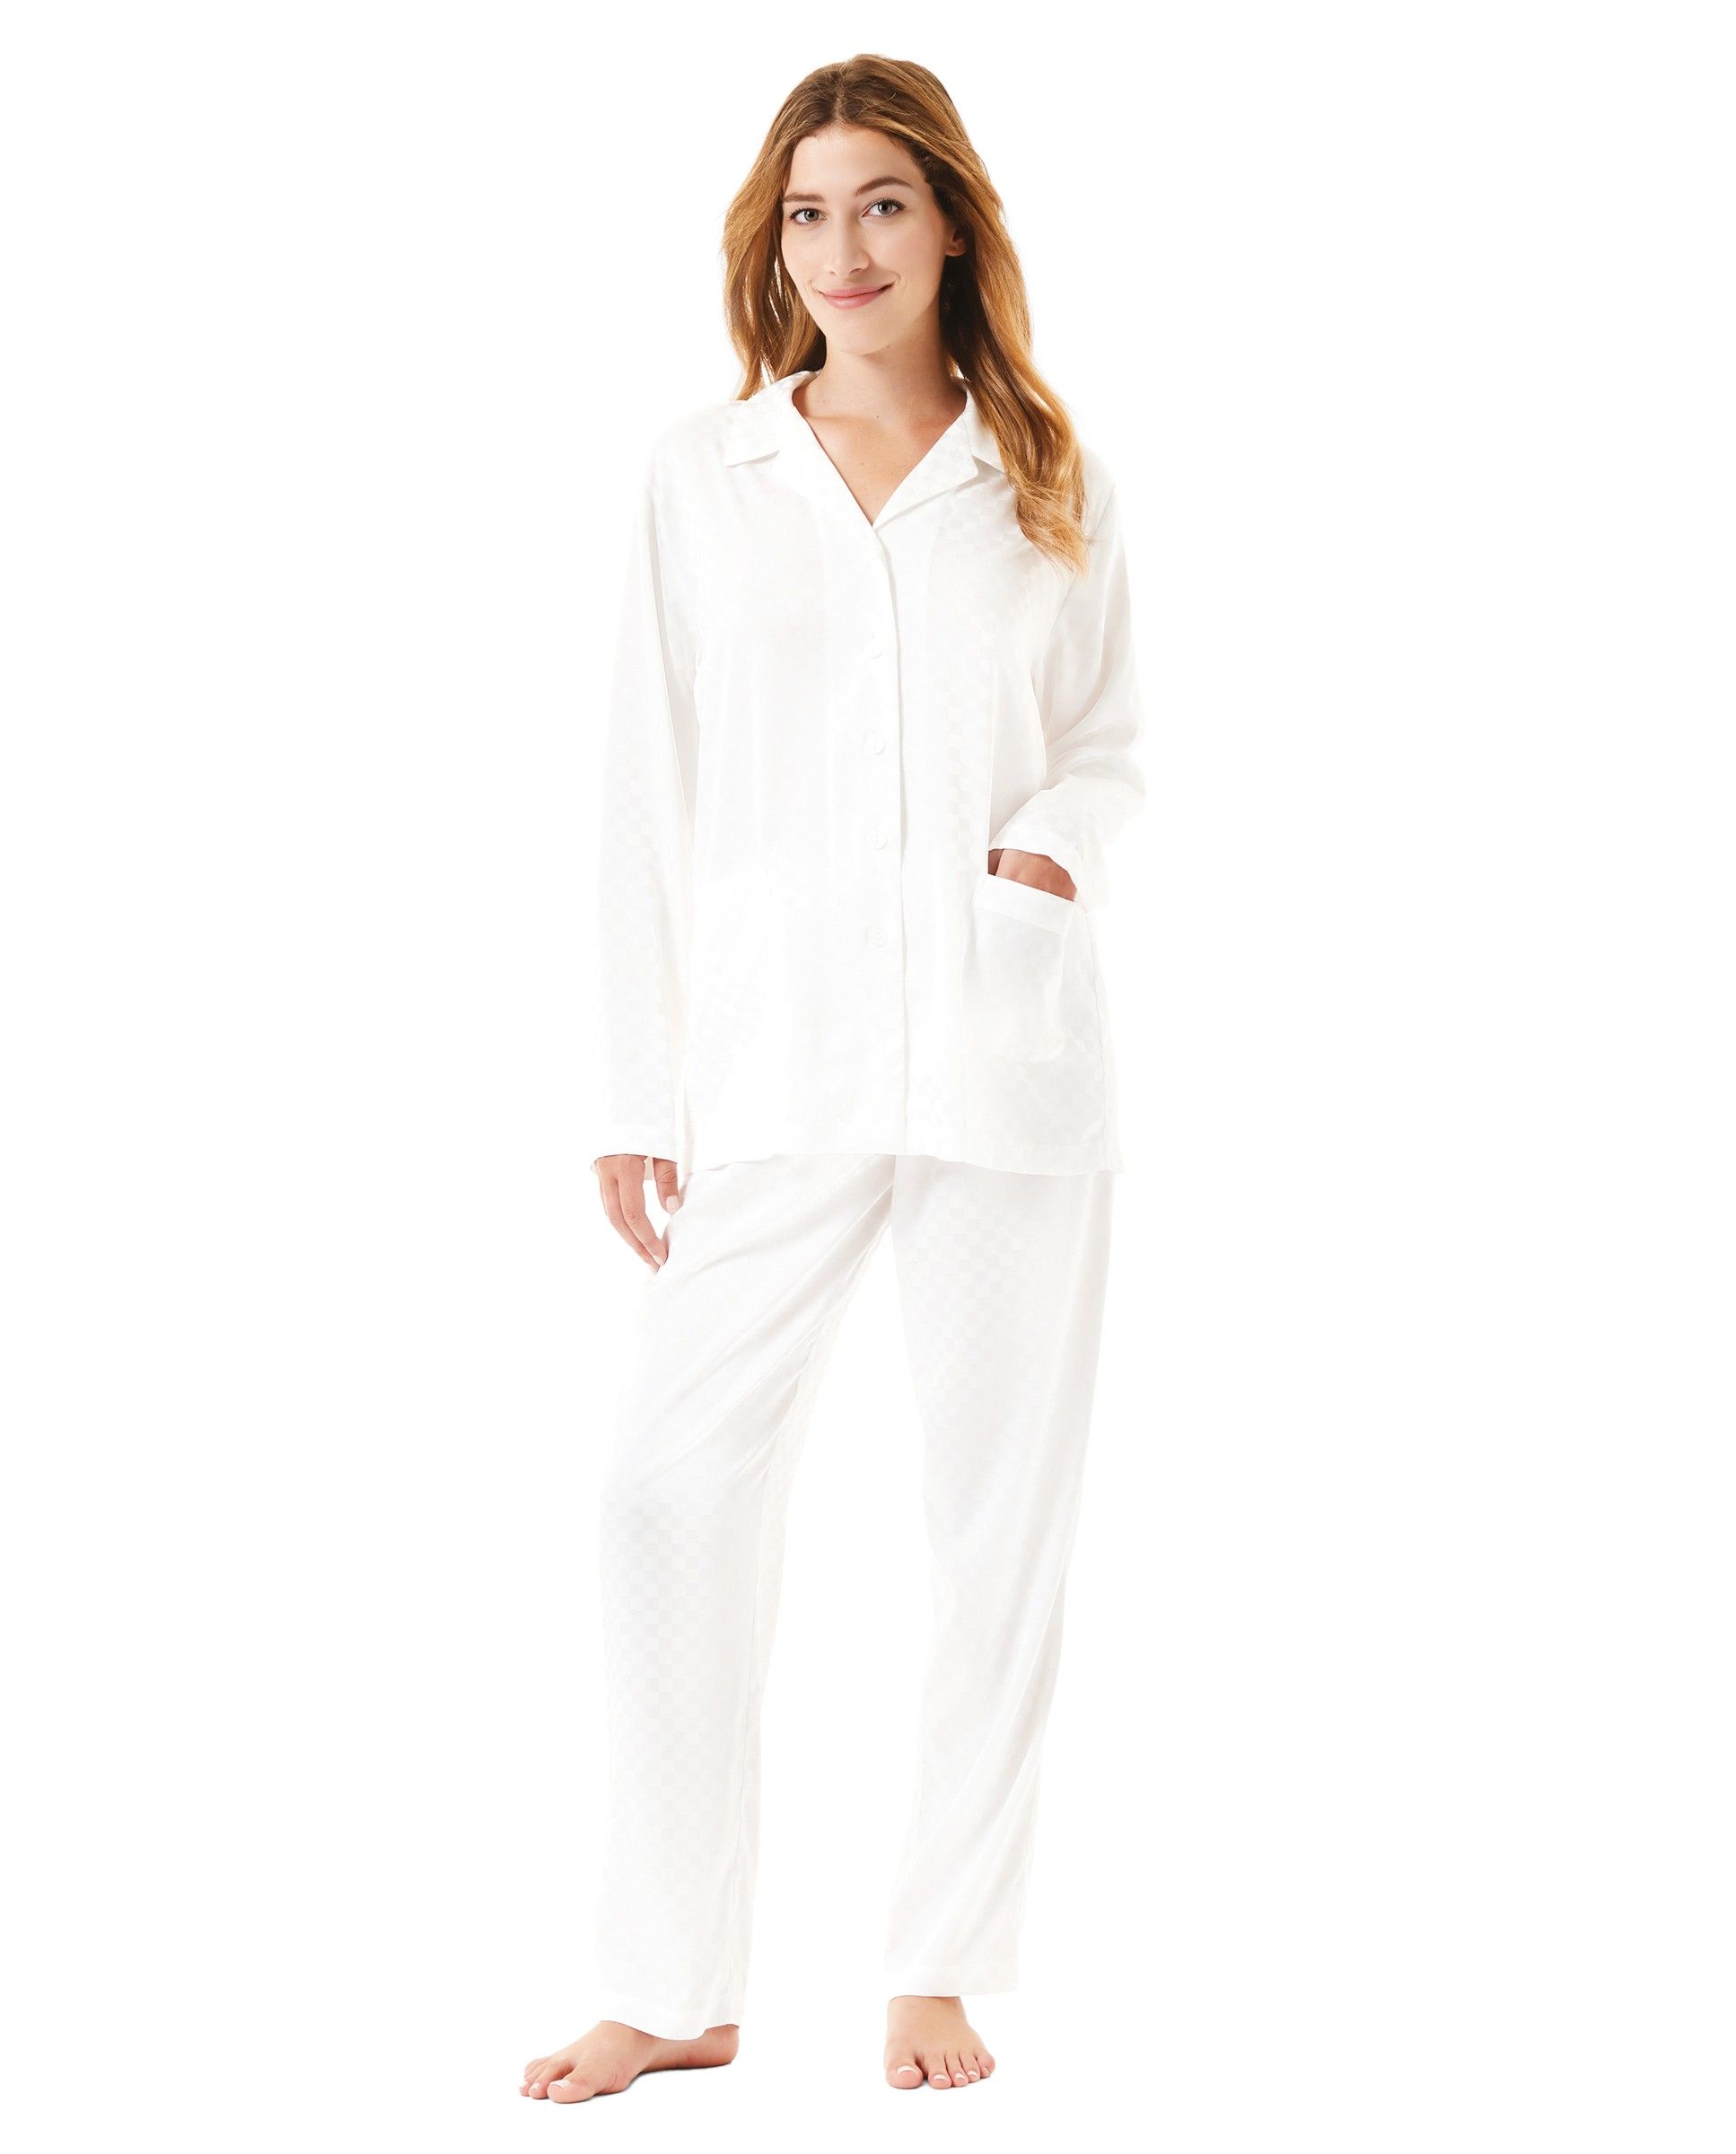 A woman wears an ivory jacquard printed long pyjama set open with buttons.